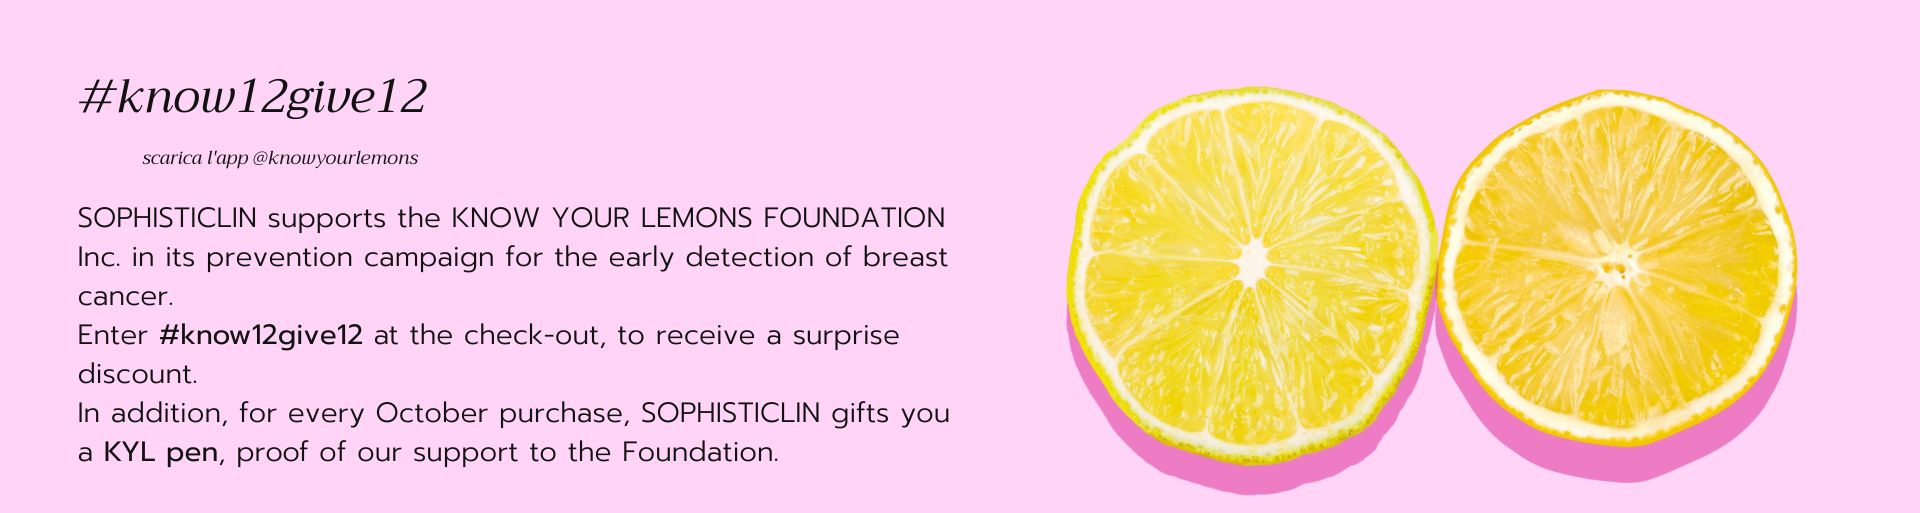 Breast cancer prevention know your lemons Sophisticlin